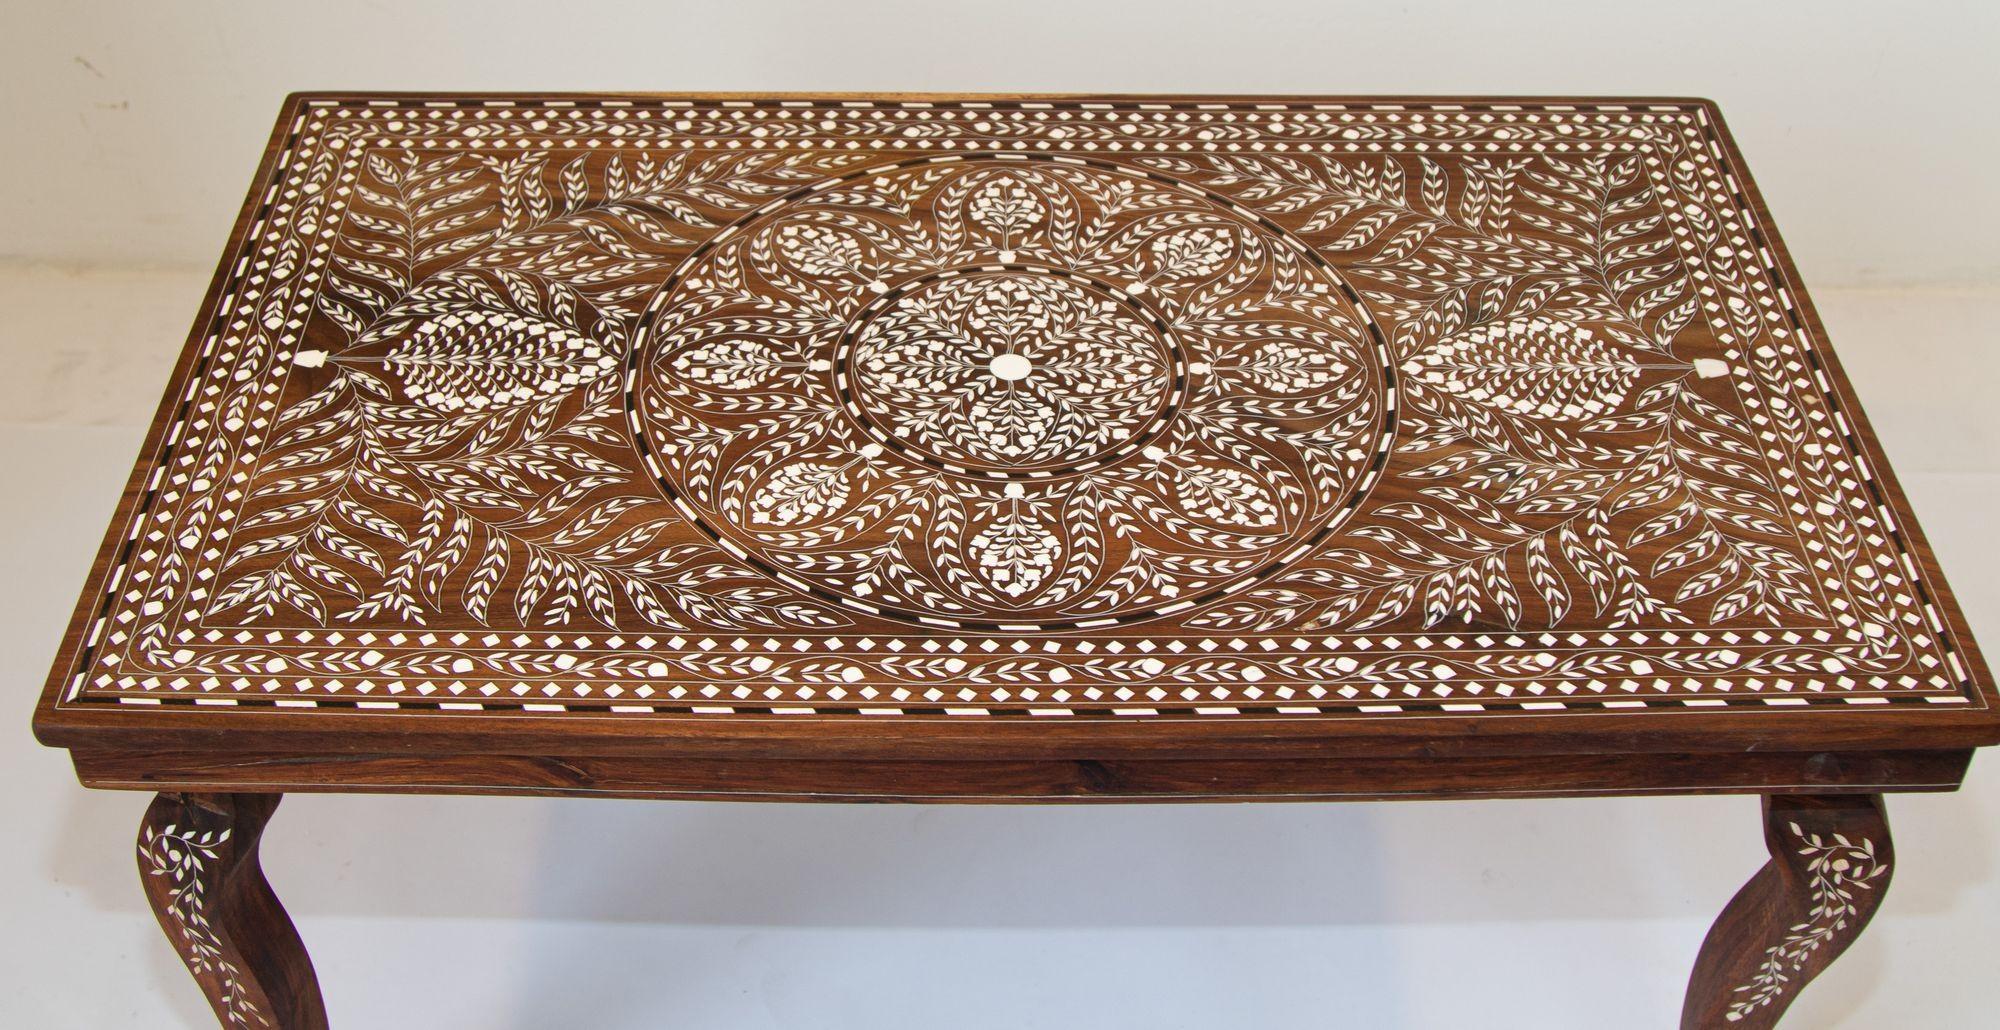 20th Century Anglo Indian Rectangular Coffee Table with Bone Inlay 1940's